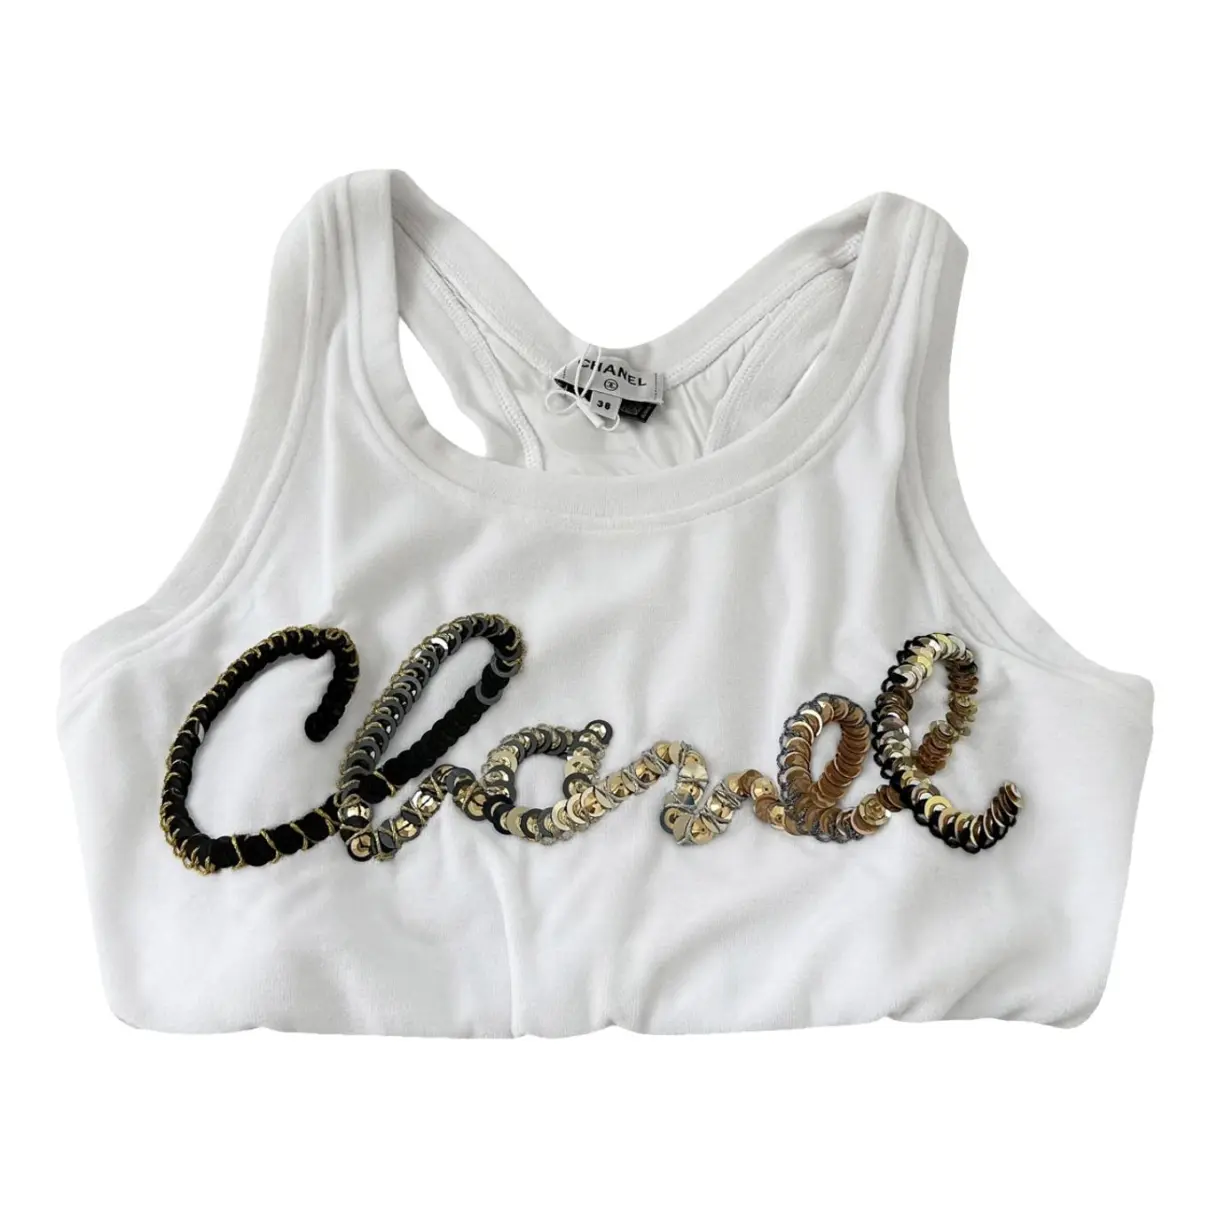 Jersey top Chanel